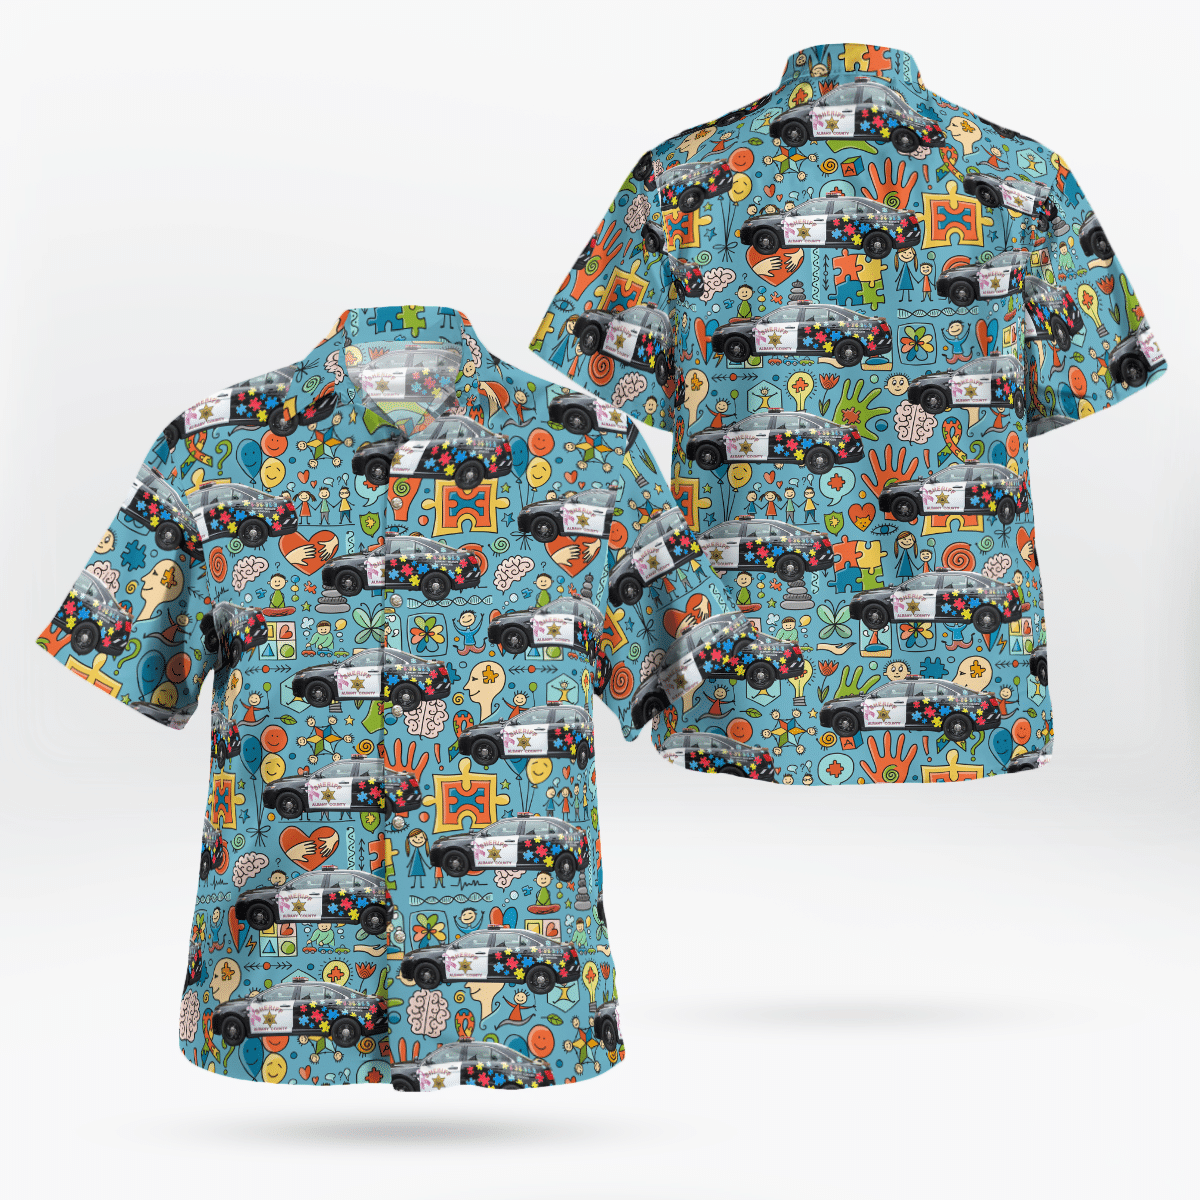 If you are in need of a new summertime look, pick up this Hawaiian shirt 30